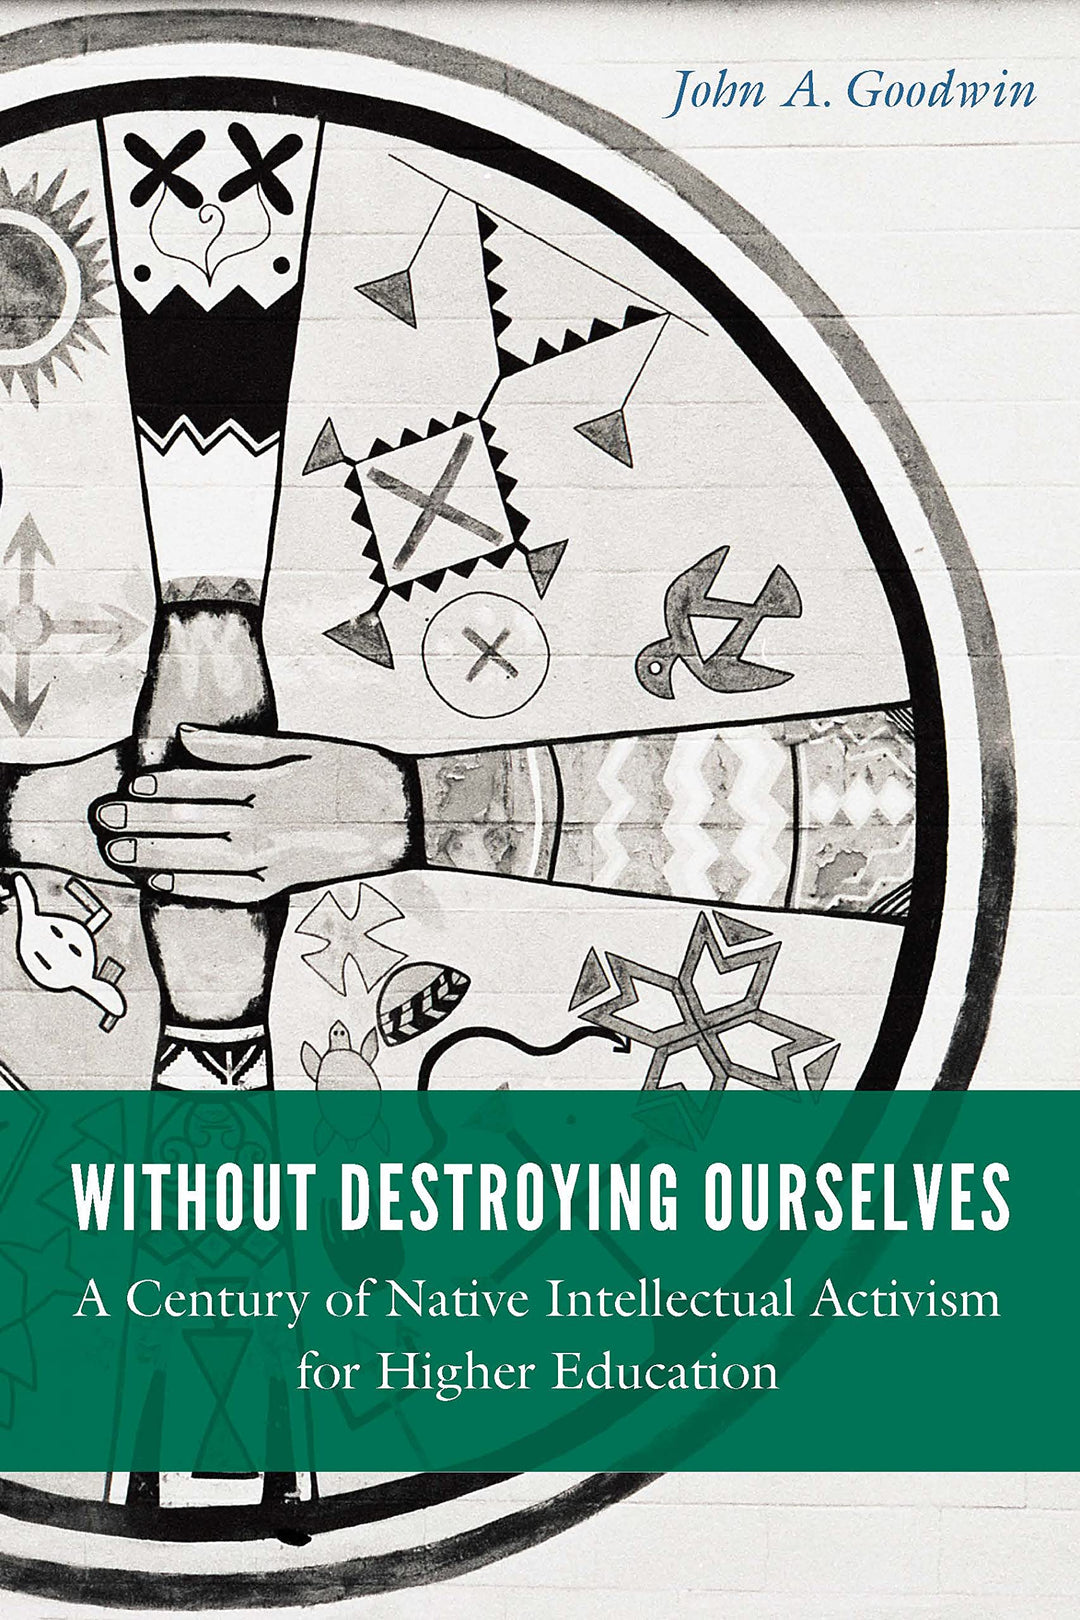 Without Destroying Ourselves: A Century of Native Intellectual Activism for Higher Education by John A. Goodwin